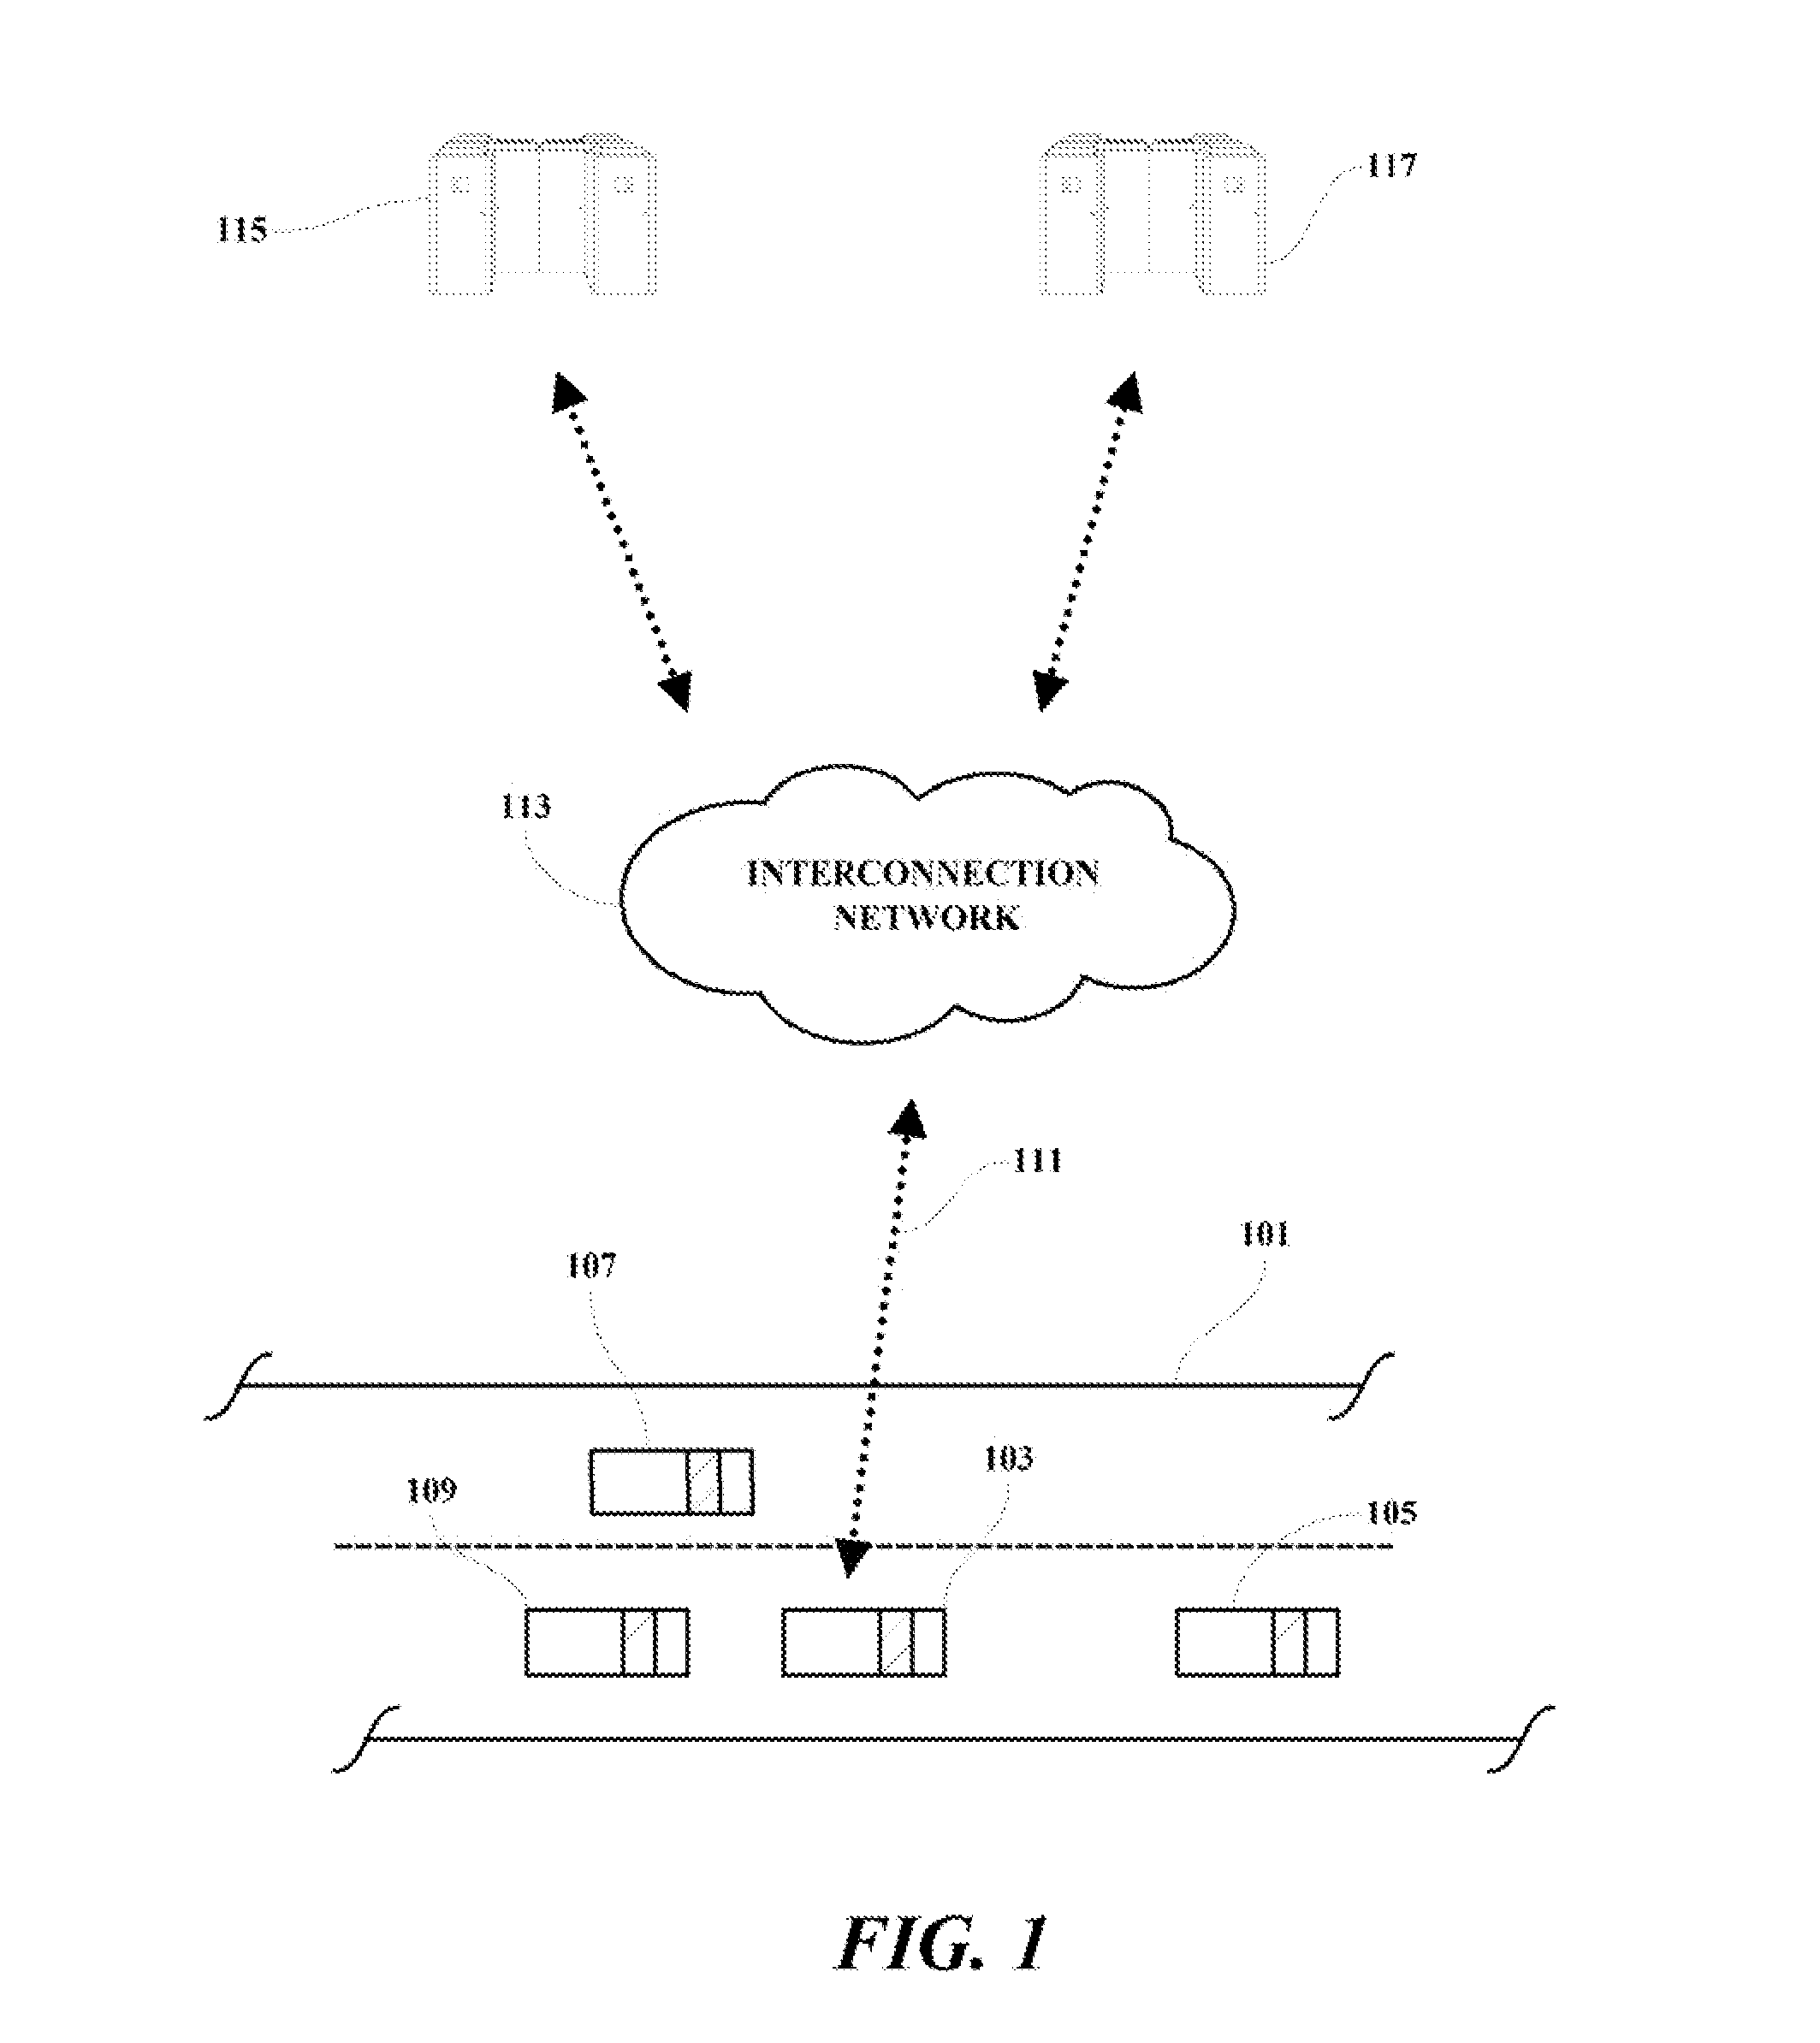 Vehicle-related video processing system